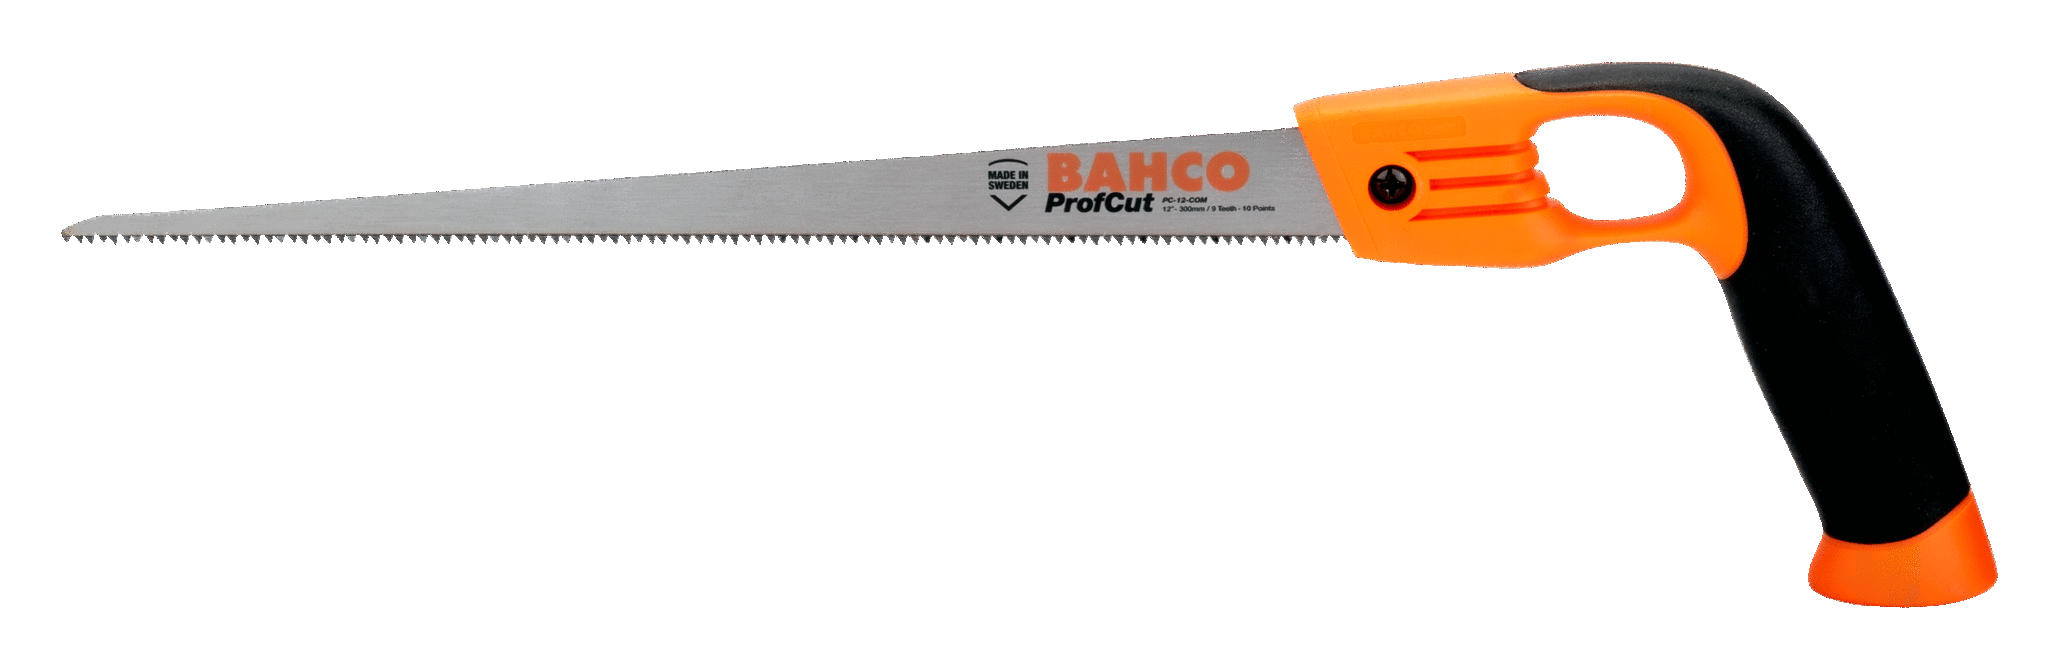 ProfCut™ Compass Saws for Wood/Plastic - PC-12-COM by Bahco